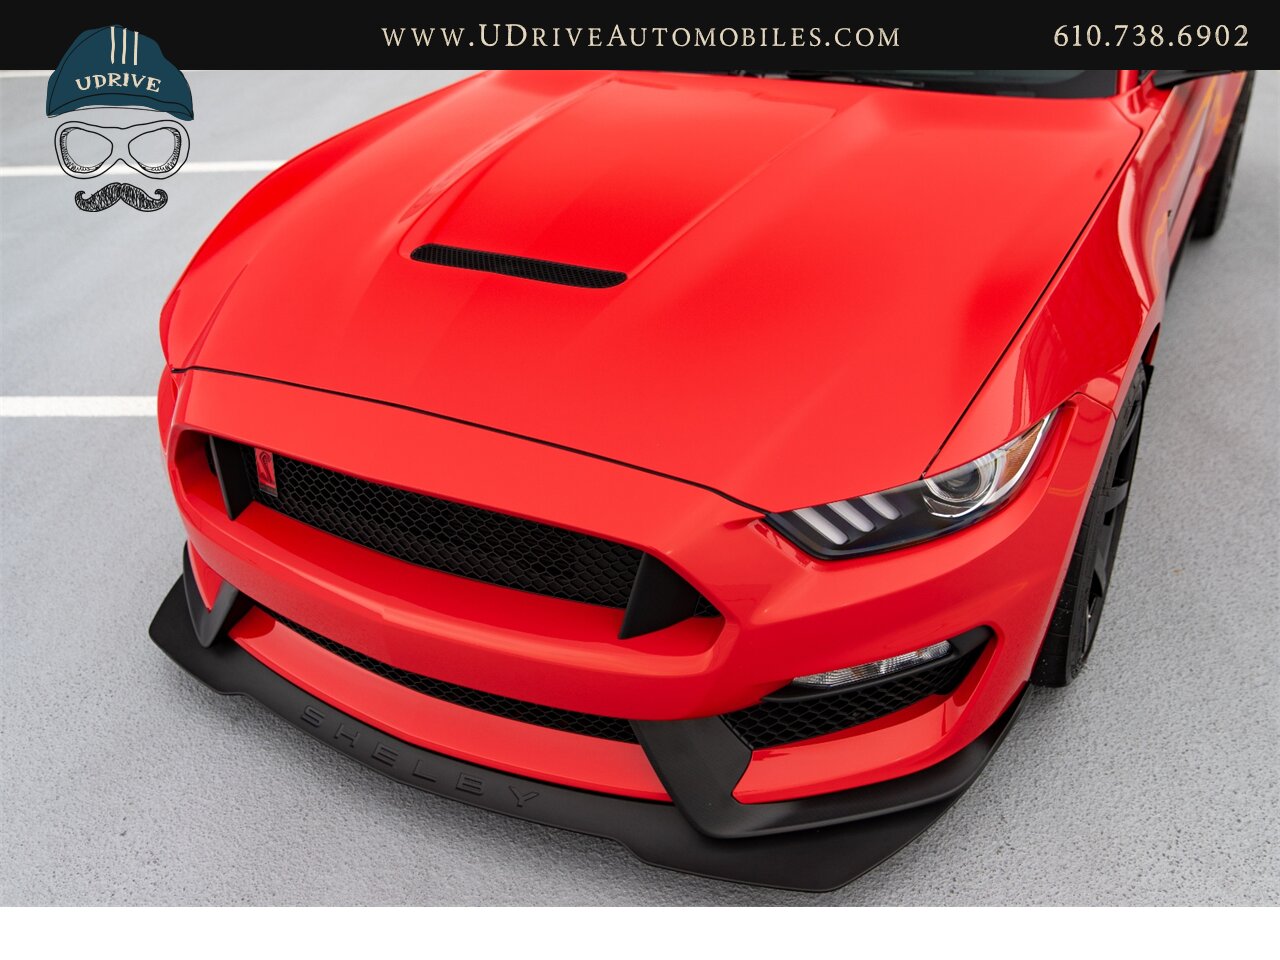 2016 Ford Mustang Shelby GT350R 3k Miles Electronics Pkg  1 of 32 Race Red Produced for USA As New - Photo 10 - West Chester, PA 19382